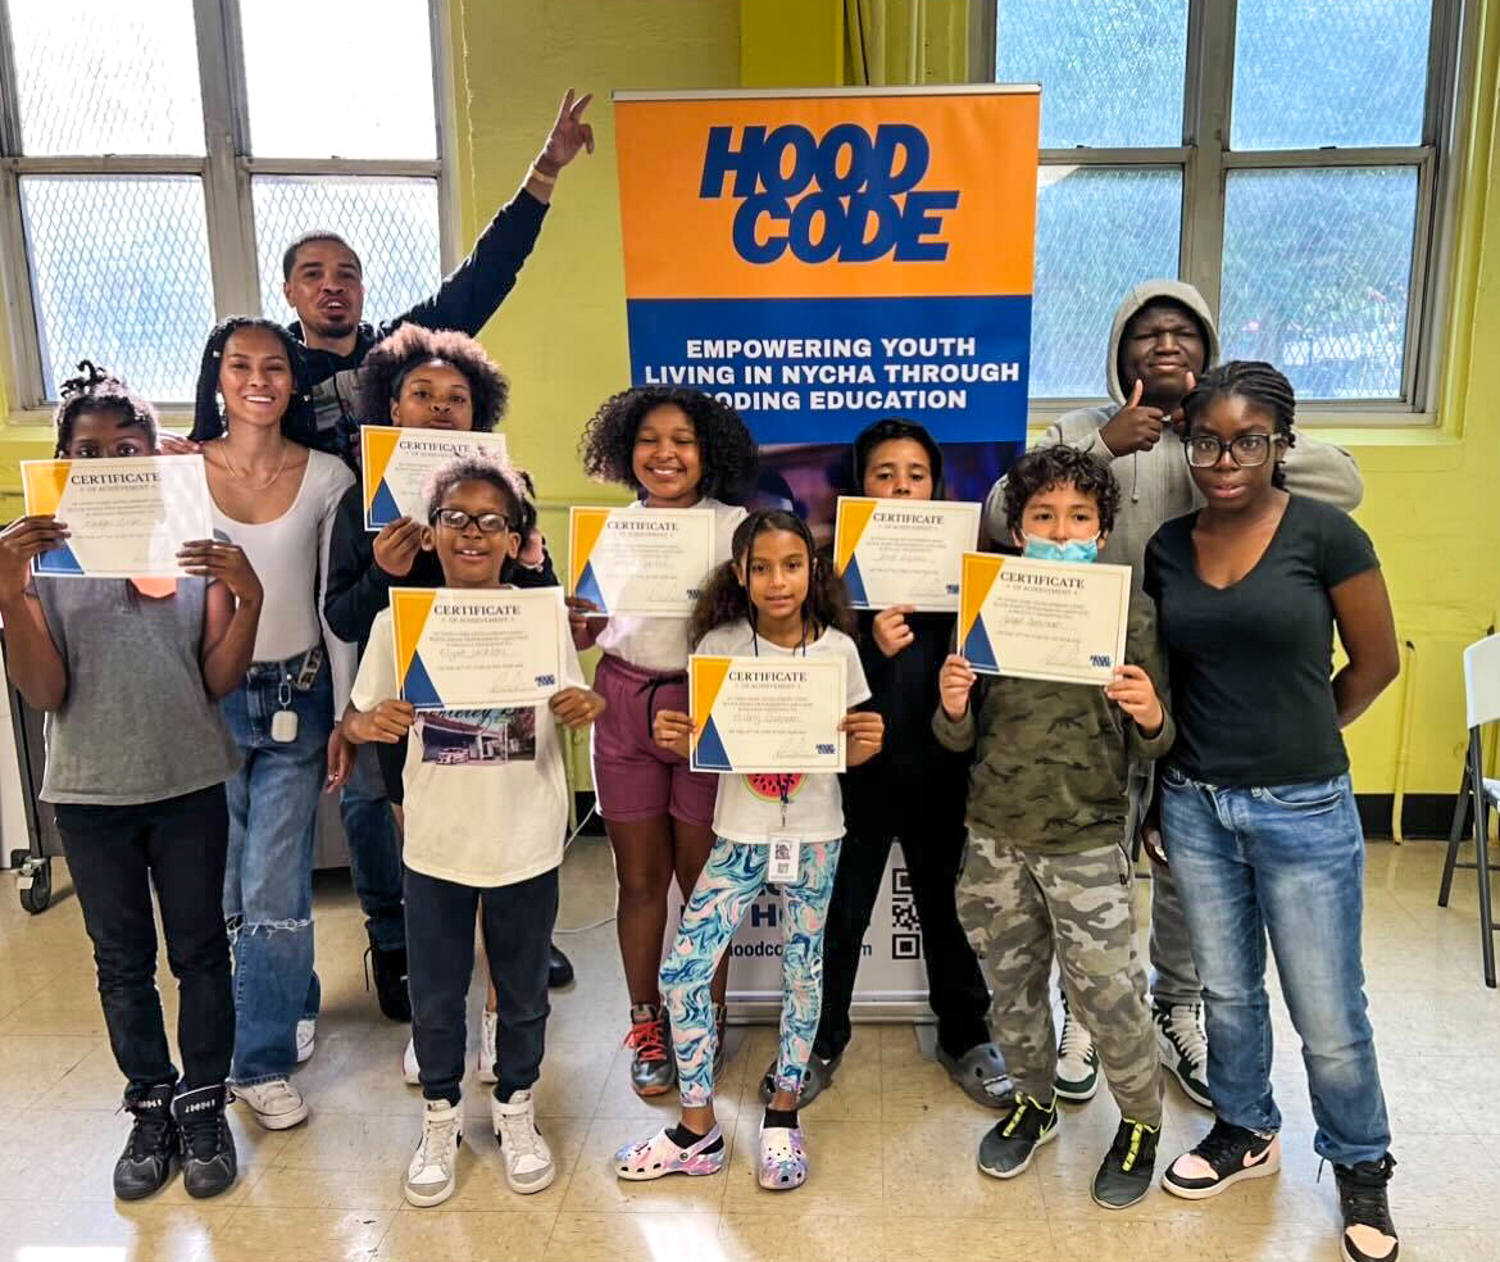 This group brings free coding education to low-income NYC students